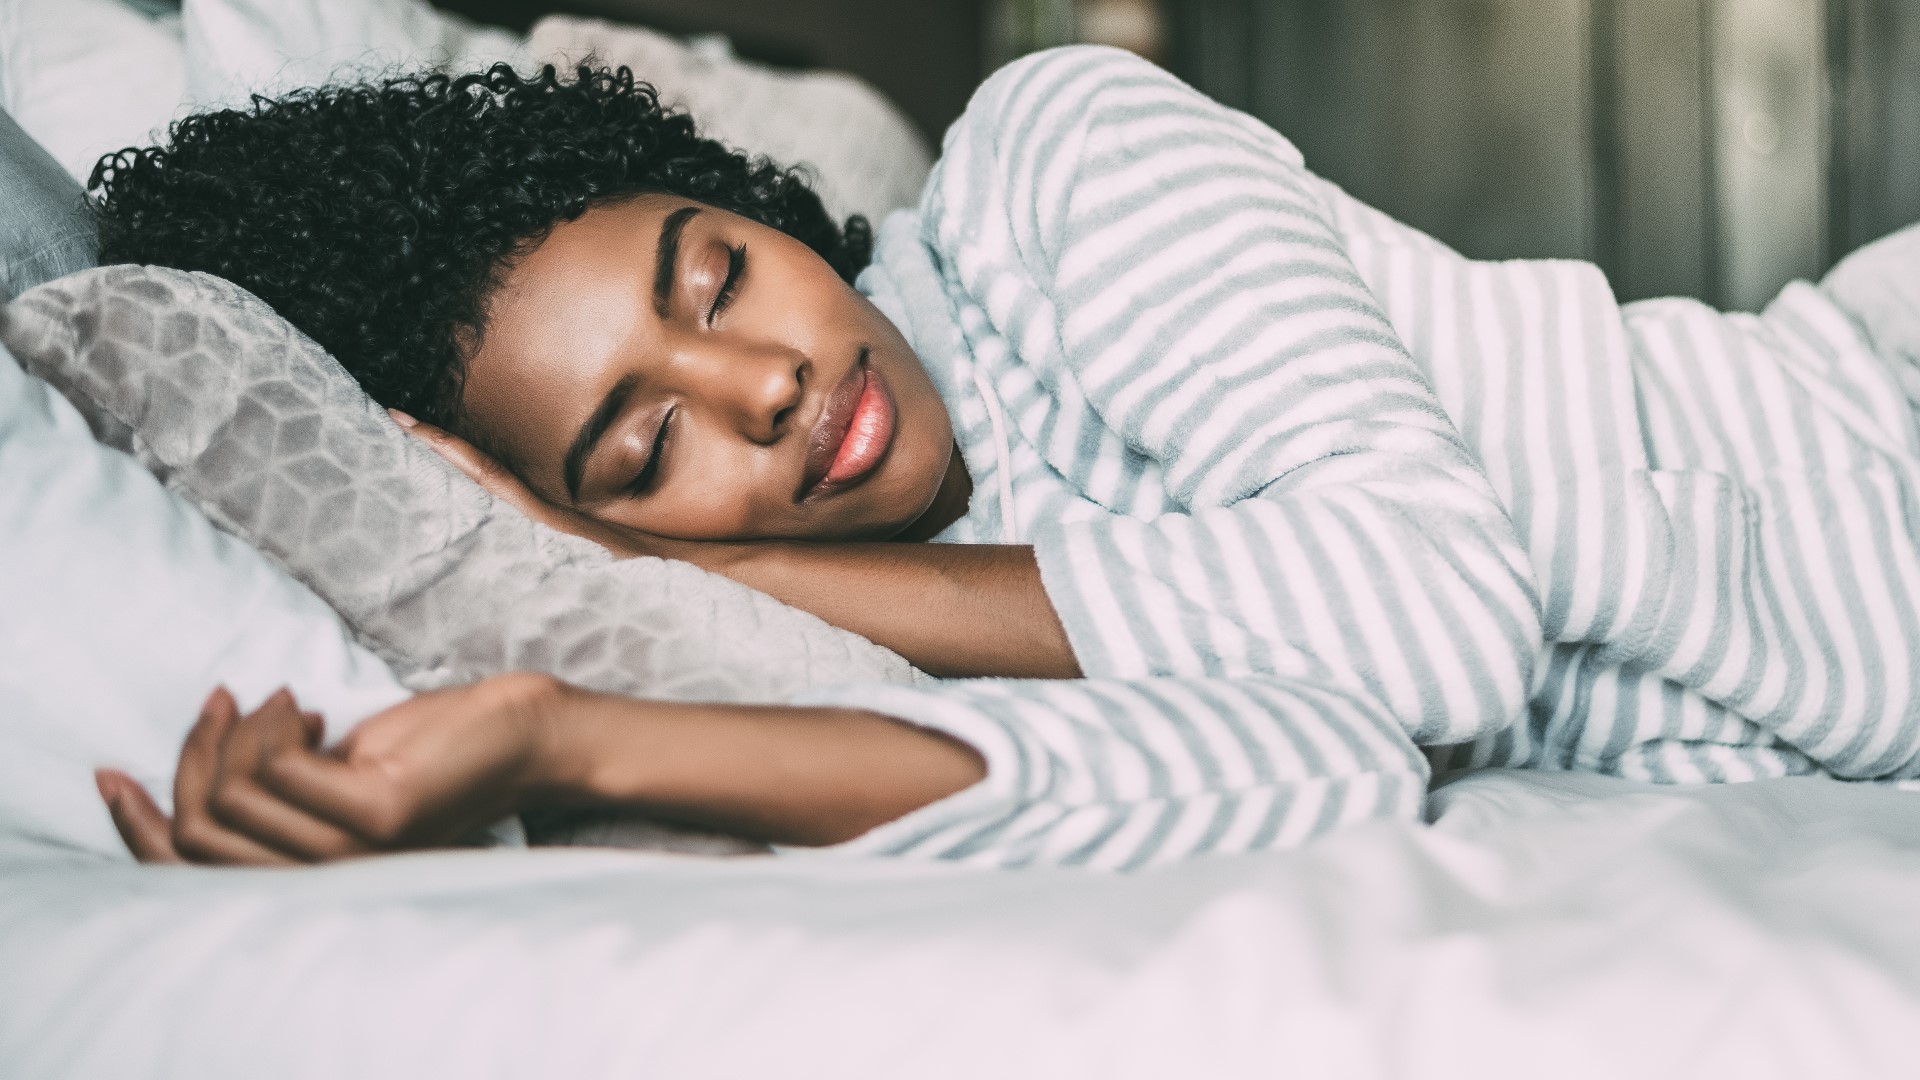 May is Better Sleep Month and since the pandemic, sleep has really taken a hit. In this Your Best Life, learn how poor sleep impacts health and how to sleep better.